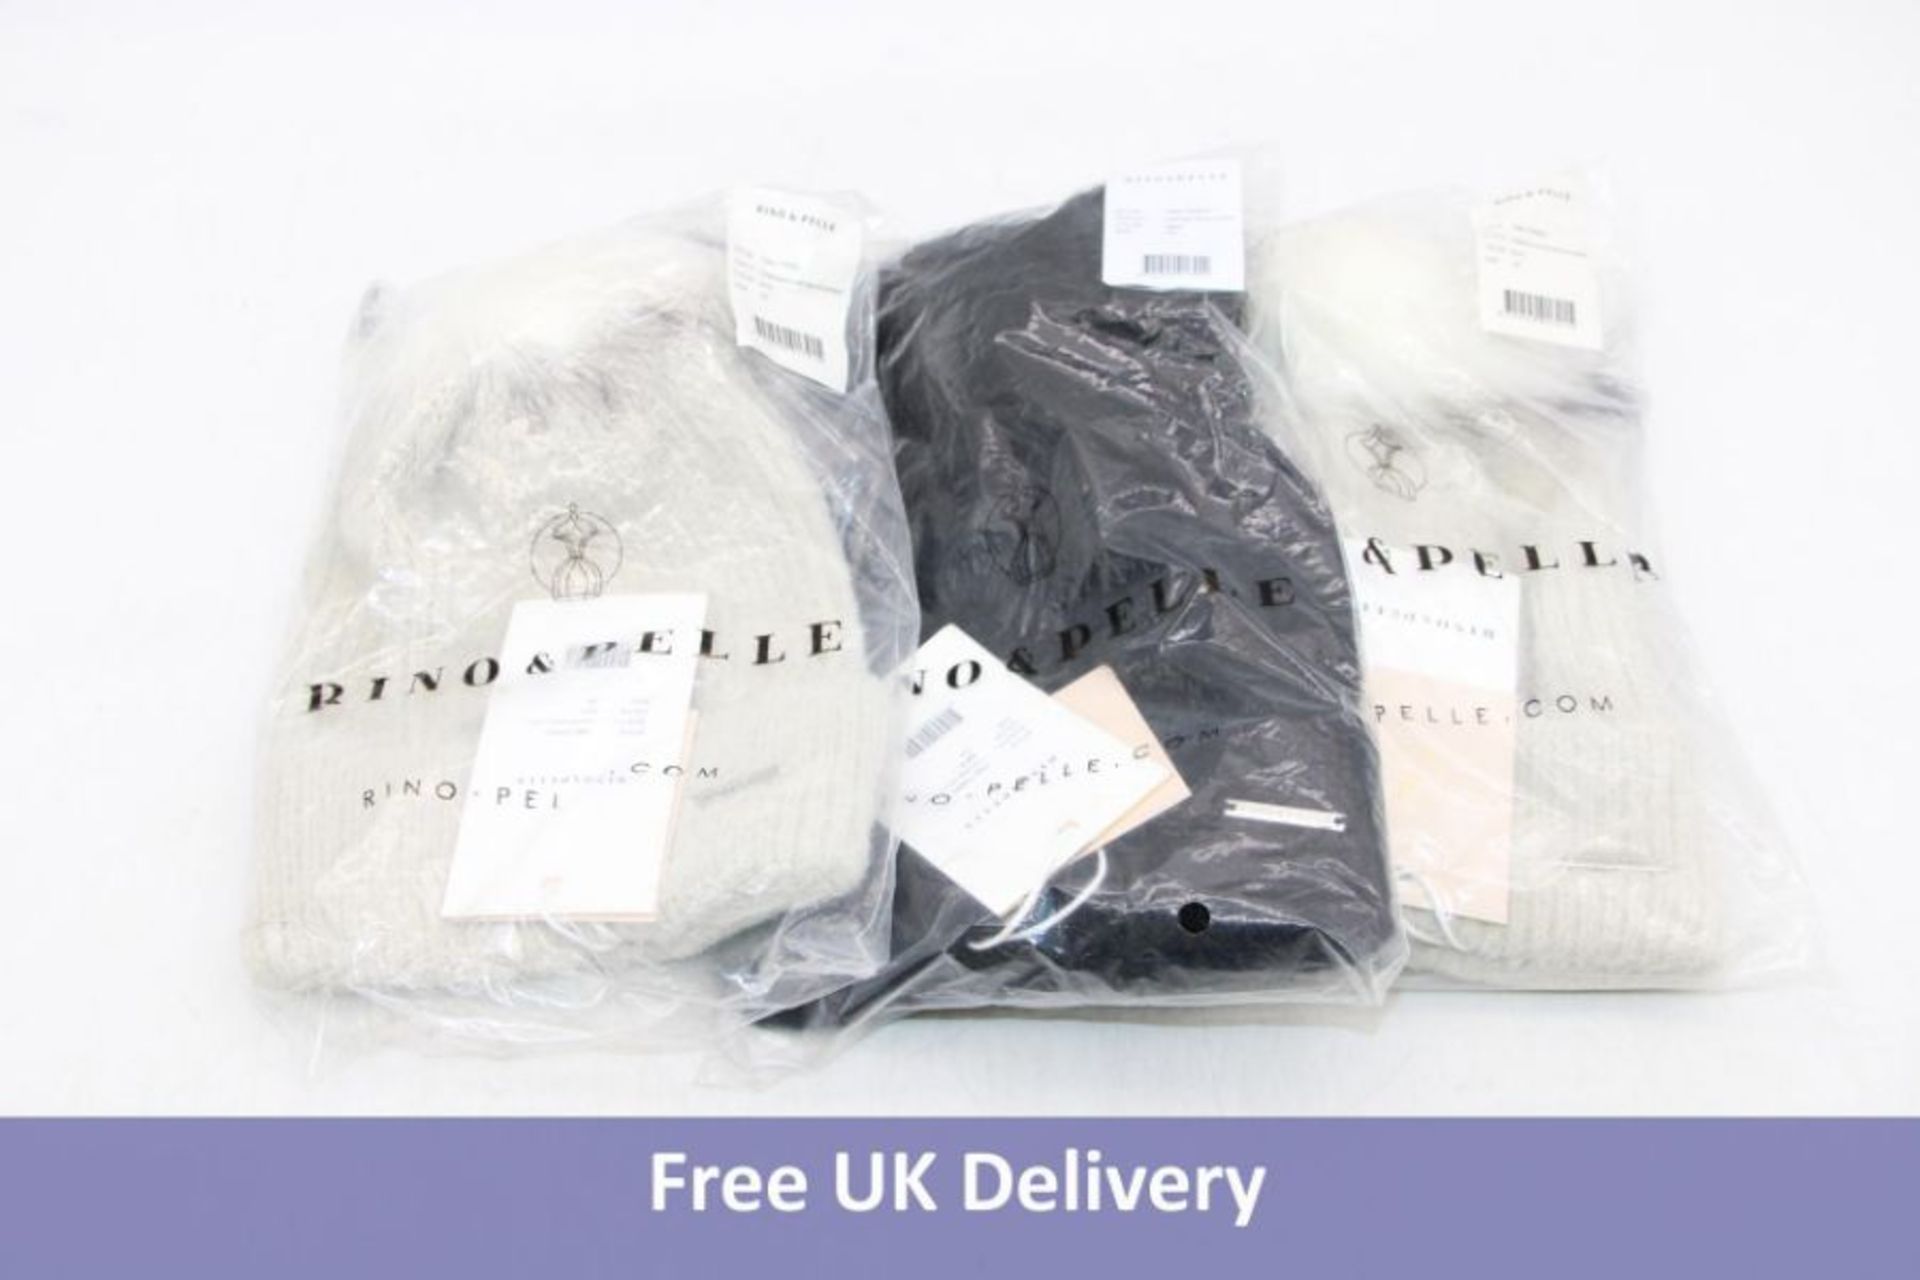 Three Rino And Pelle Beanie Hats to include 1x Black, One Size, 2x Birch, One Size